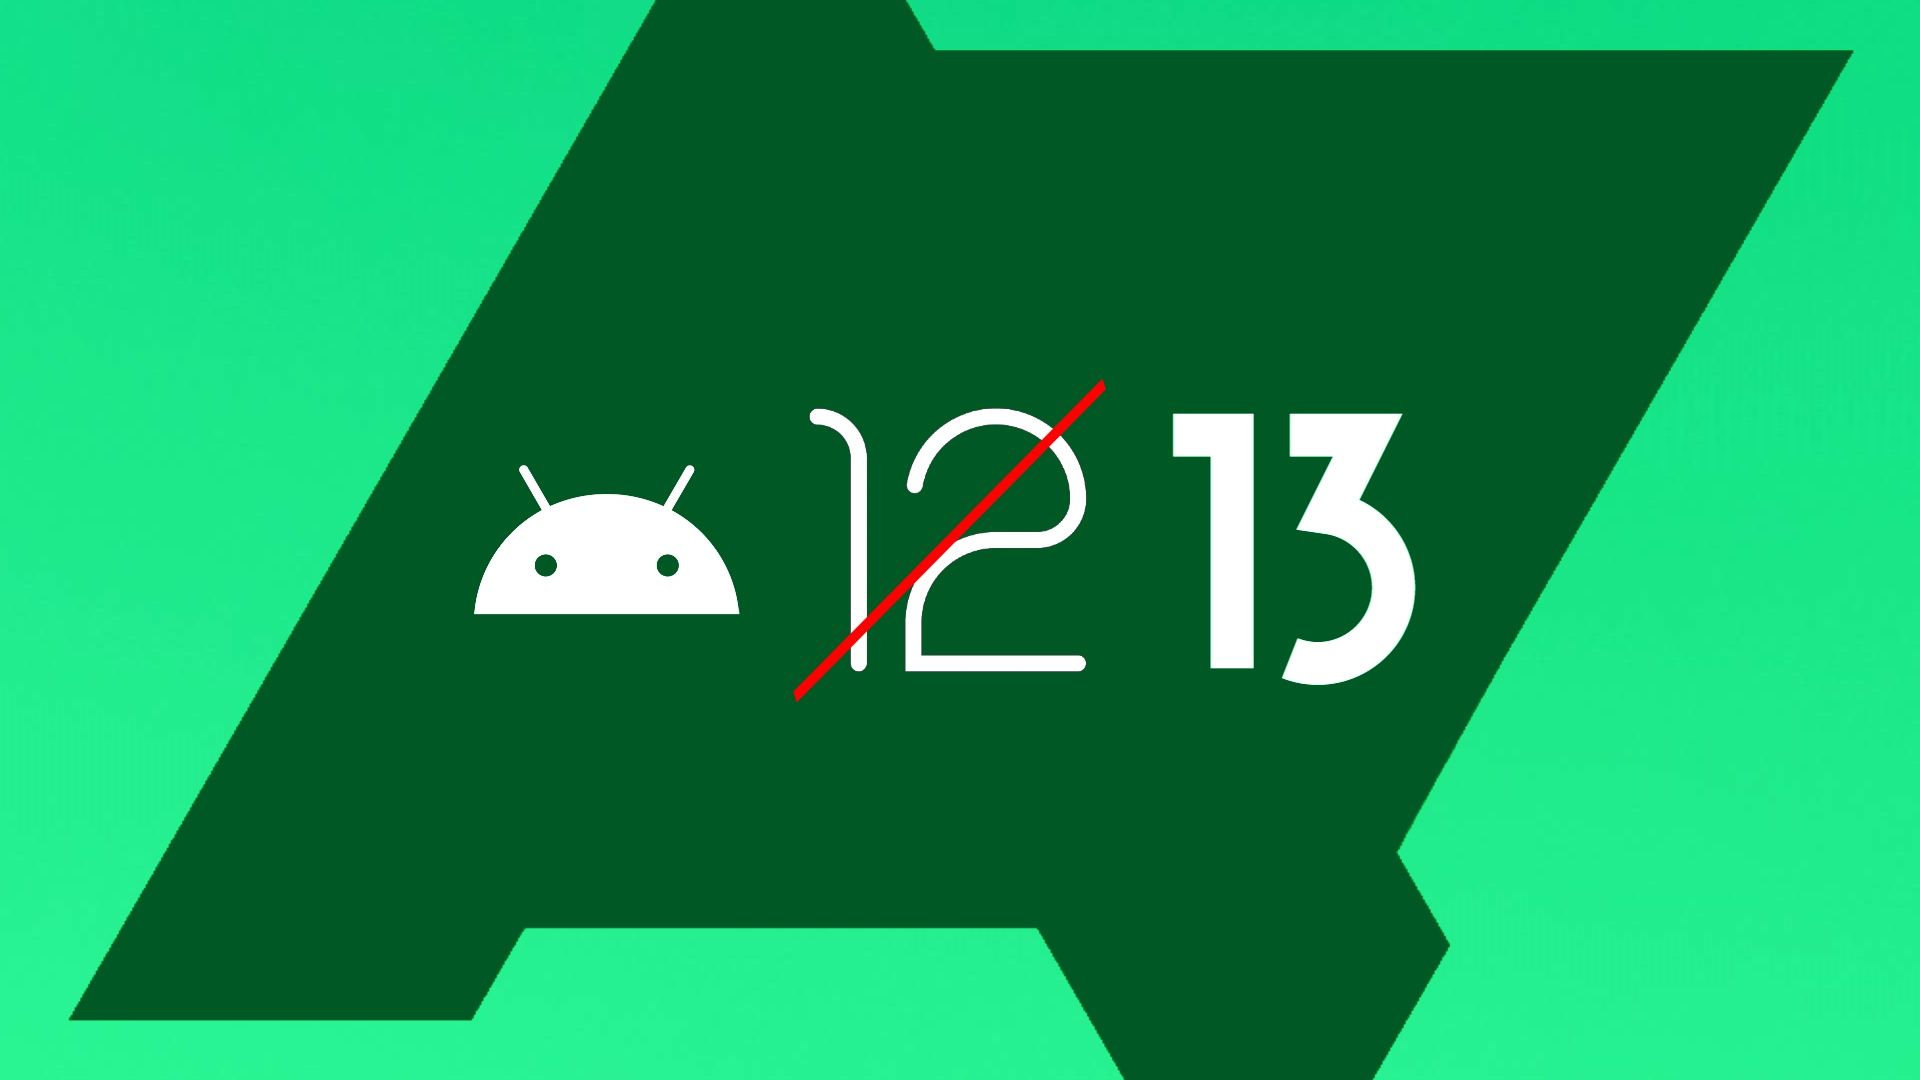 The Android logo showing the change from Android 12 to Android 13